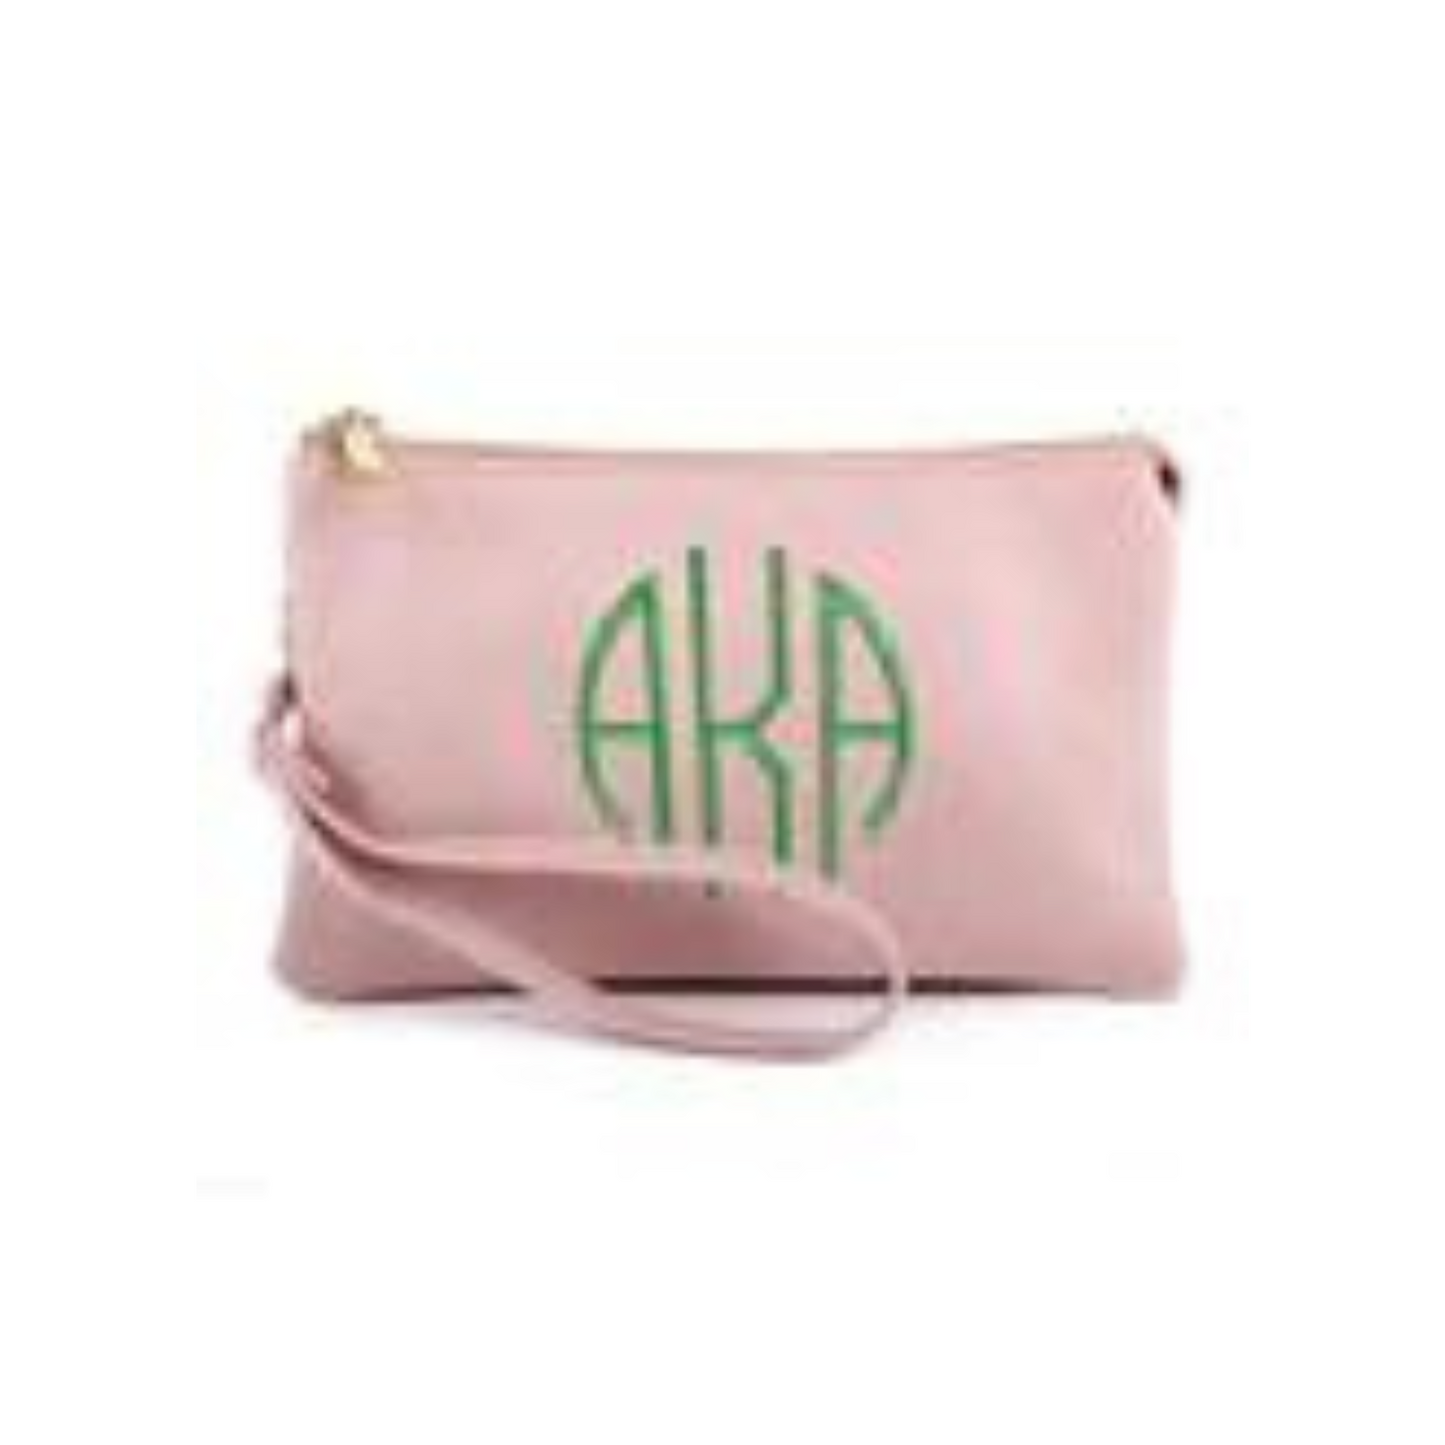 This classic crossbody bag is crafted of durable faux leather, perfect for everyday use. Its small size makes it easy to carry while still providing ample storage. Choose from an array of attractive colors to make your bag truly unique. Also, this bag is easily monogrammed, to personalize your style.